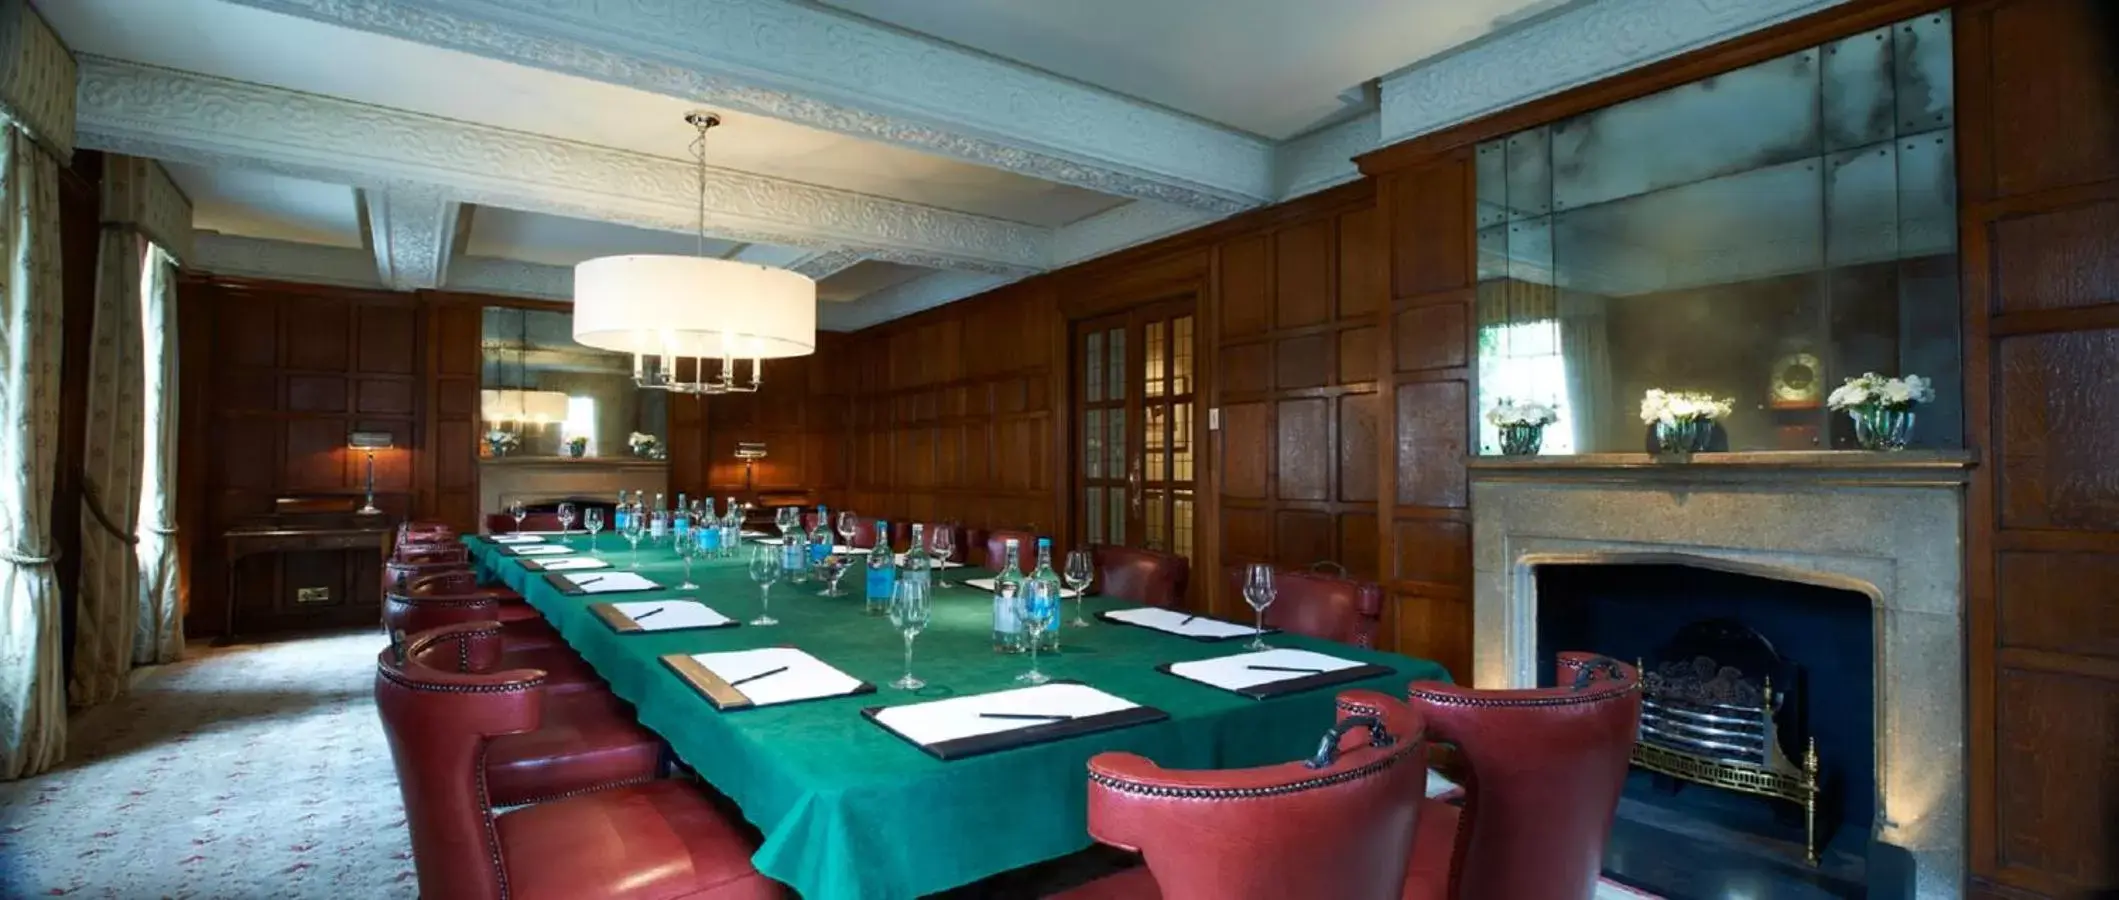 Business facilities in Durrants Hotel